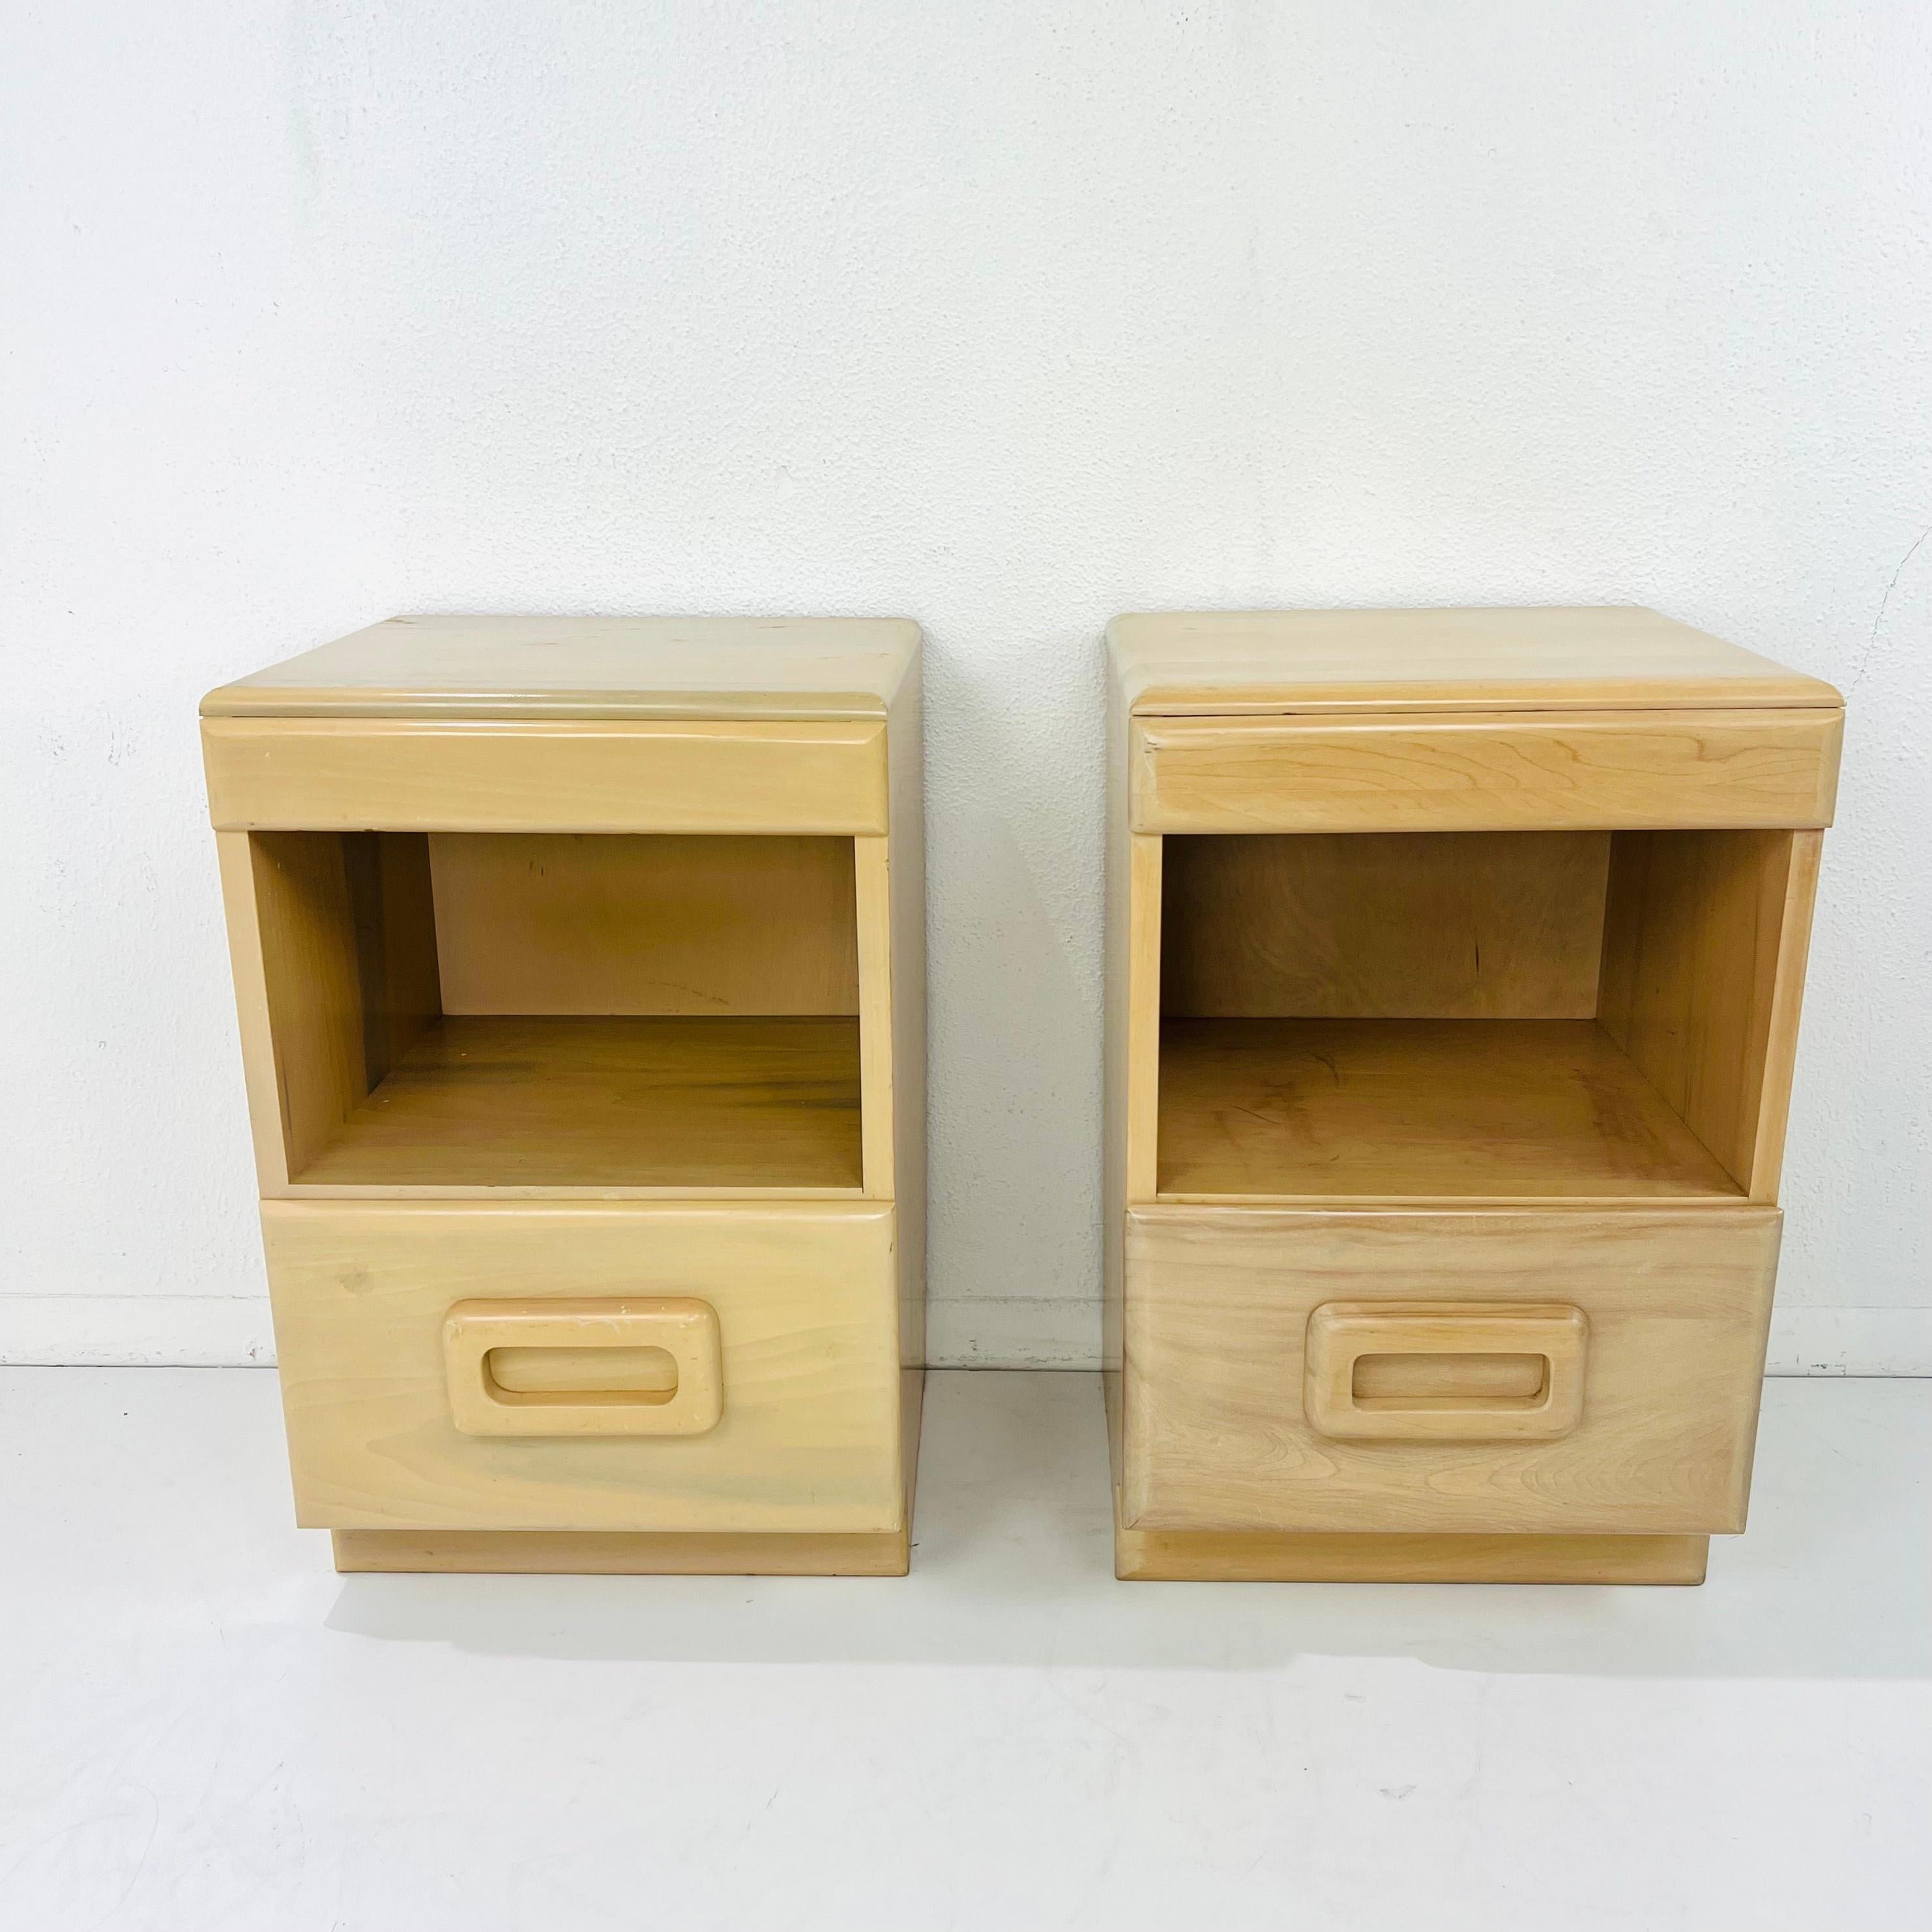 Iconic pair of early 20th century American modernist nightstands featuring drawers with wooden pulls and dovetail joints, designed by Russel Wright for Conant Ball, circa 1940. Beginning in the late 1920s through the 1960s, Russel Wright created a